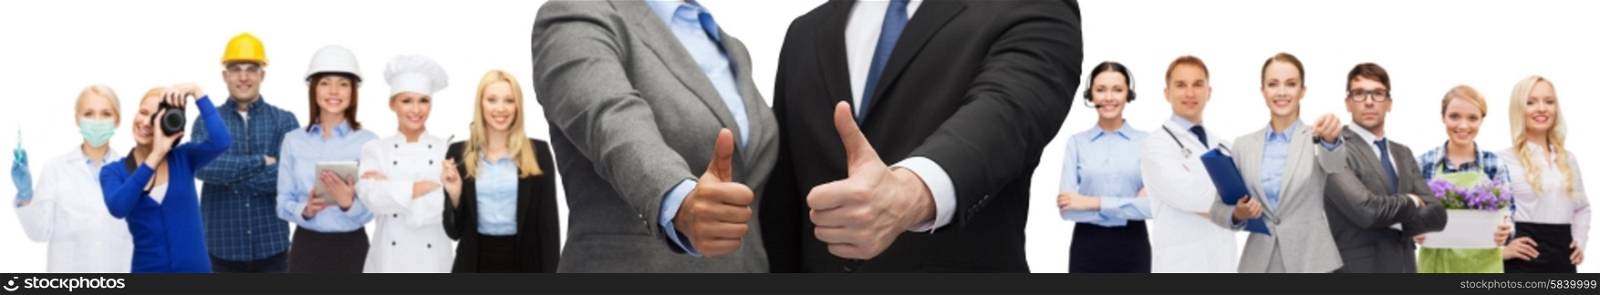 business, people, cooperation, success and gesture concept - businessman and businesswoman showing thumbs up over representatives of different professions background